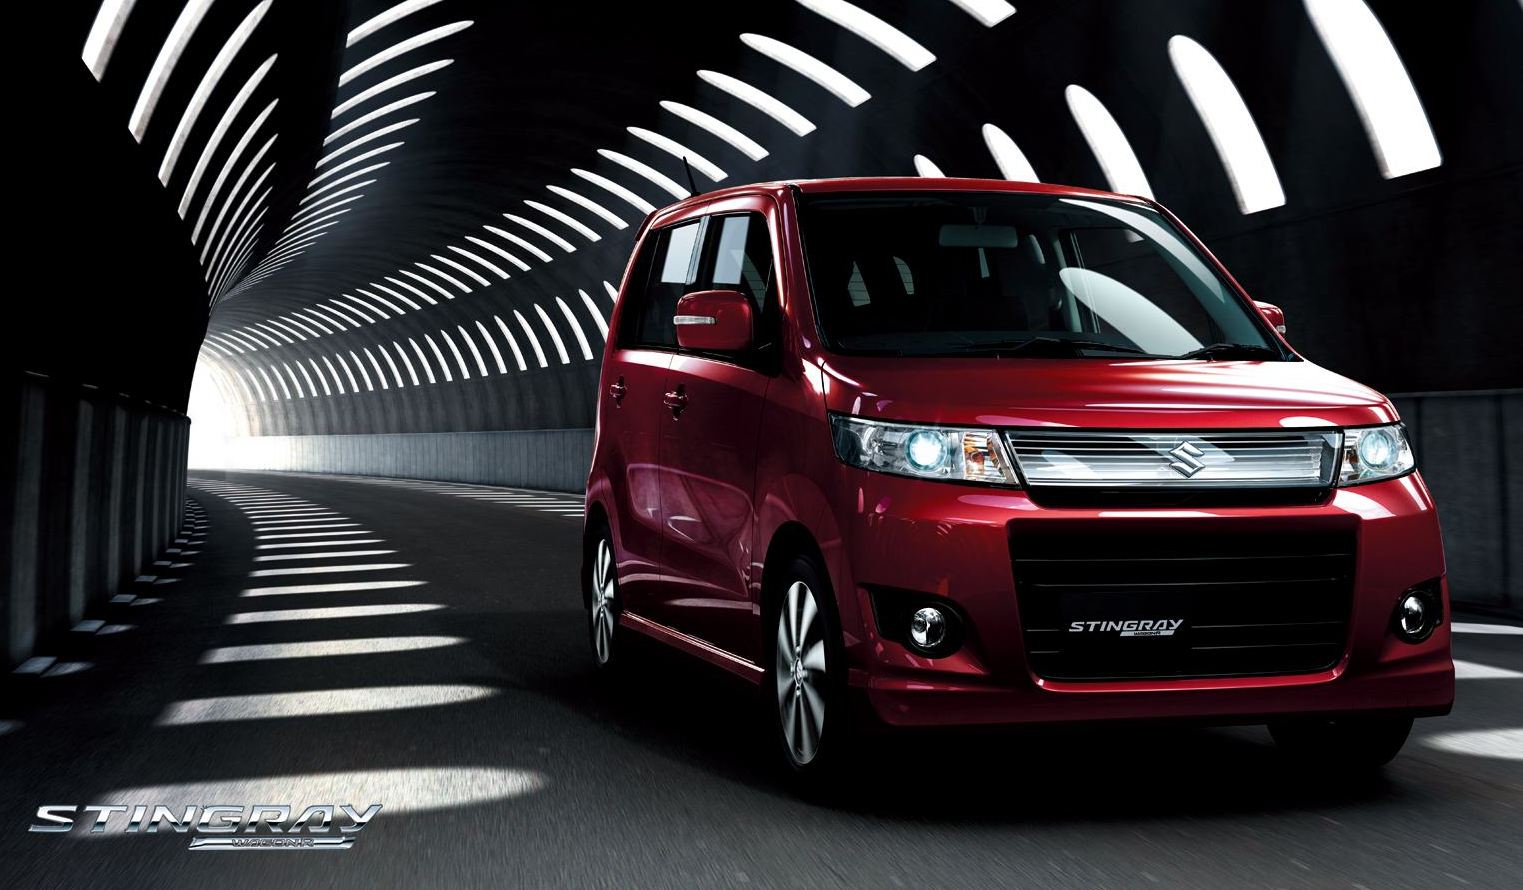 Japan Kei cars October 2010 Wagon R back on top Best Selling